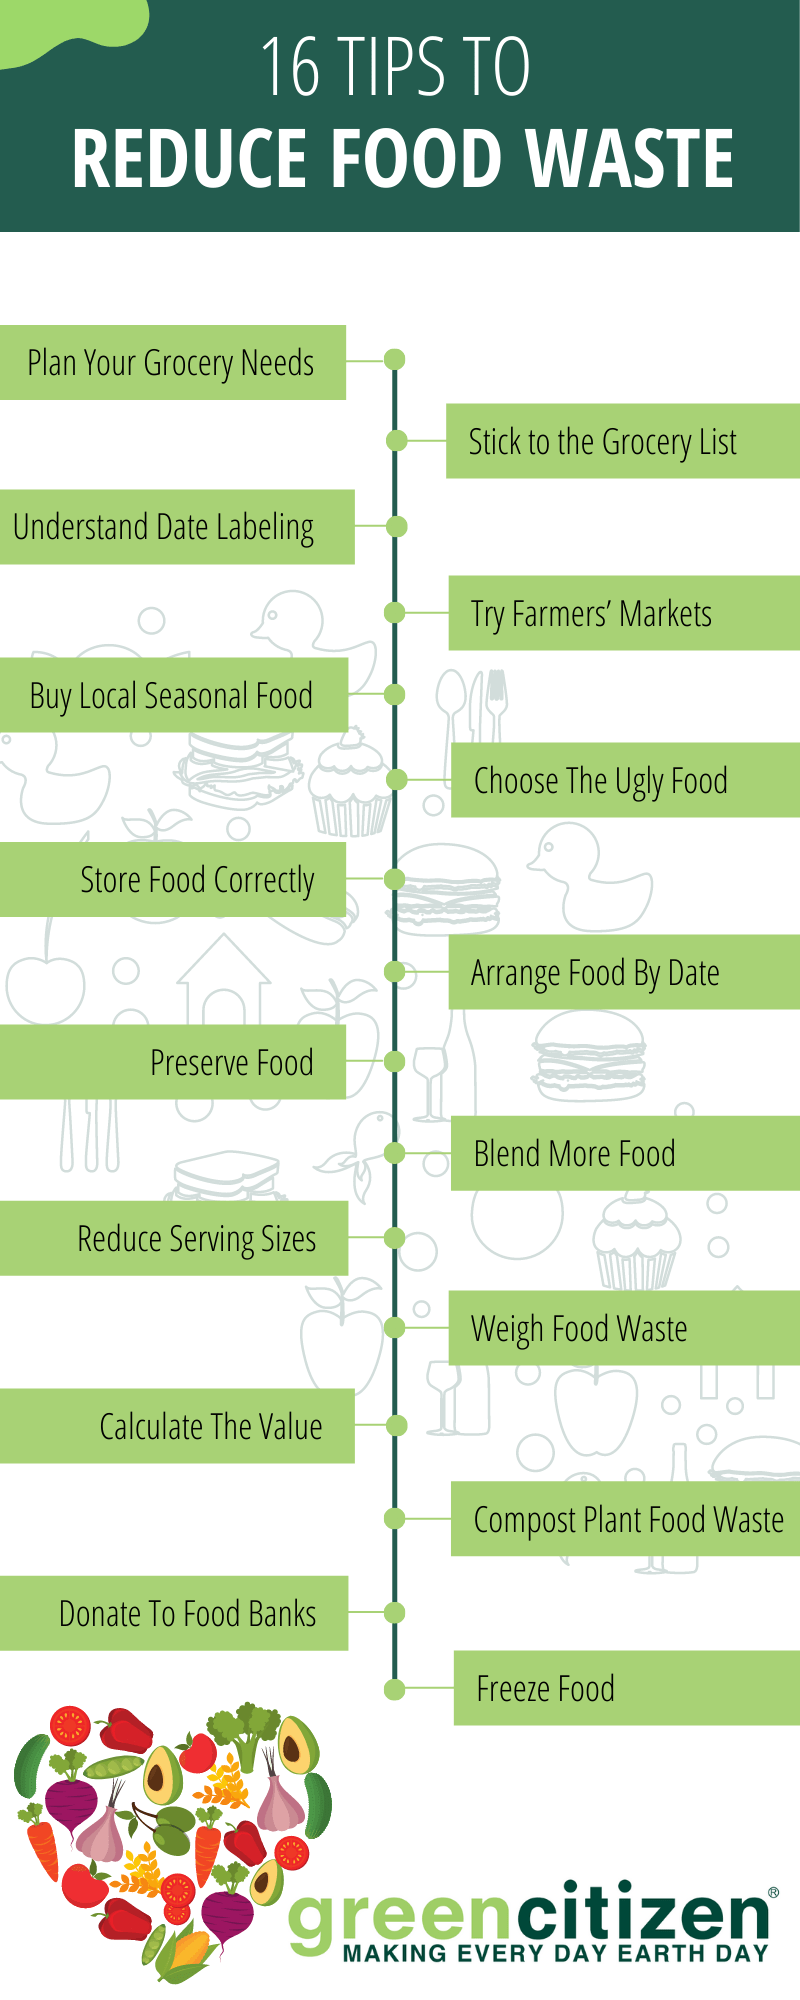 Tips to Reduce Food Waste